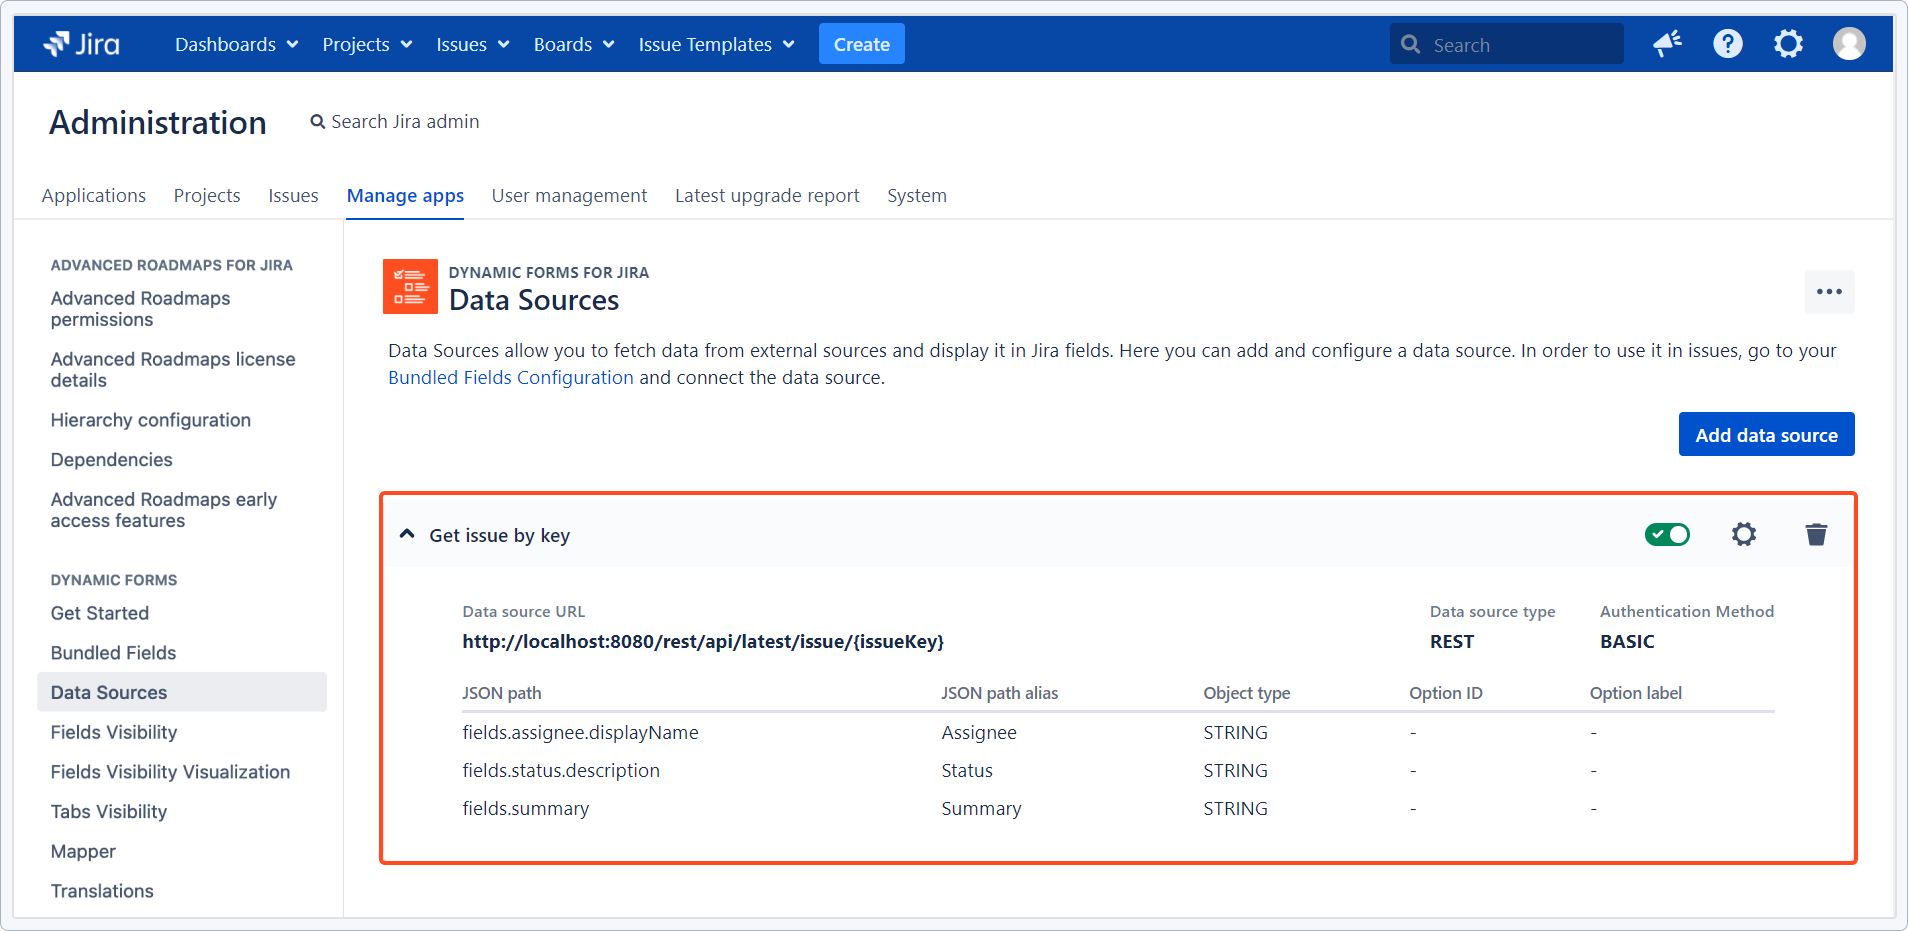 Dynamic Forms for Jira - Bundled Fields Data Sources: Configuration result